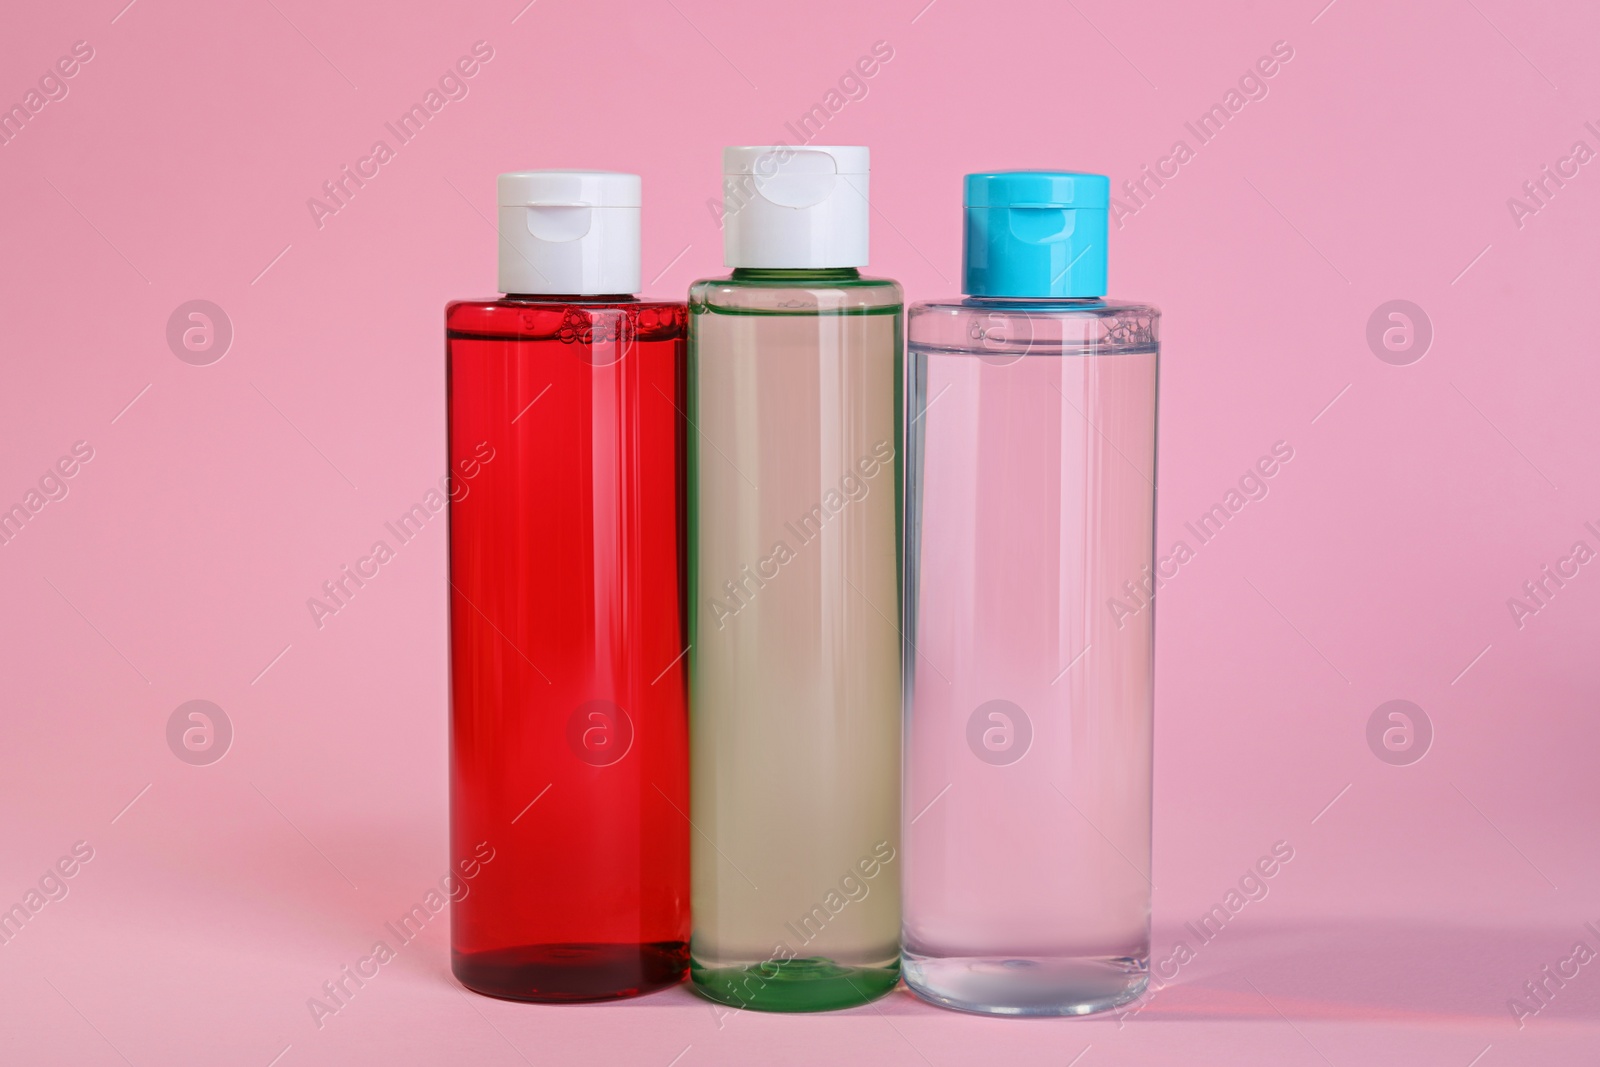 Photo of Bottles of micellar water on pink background